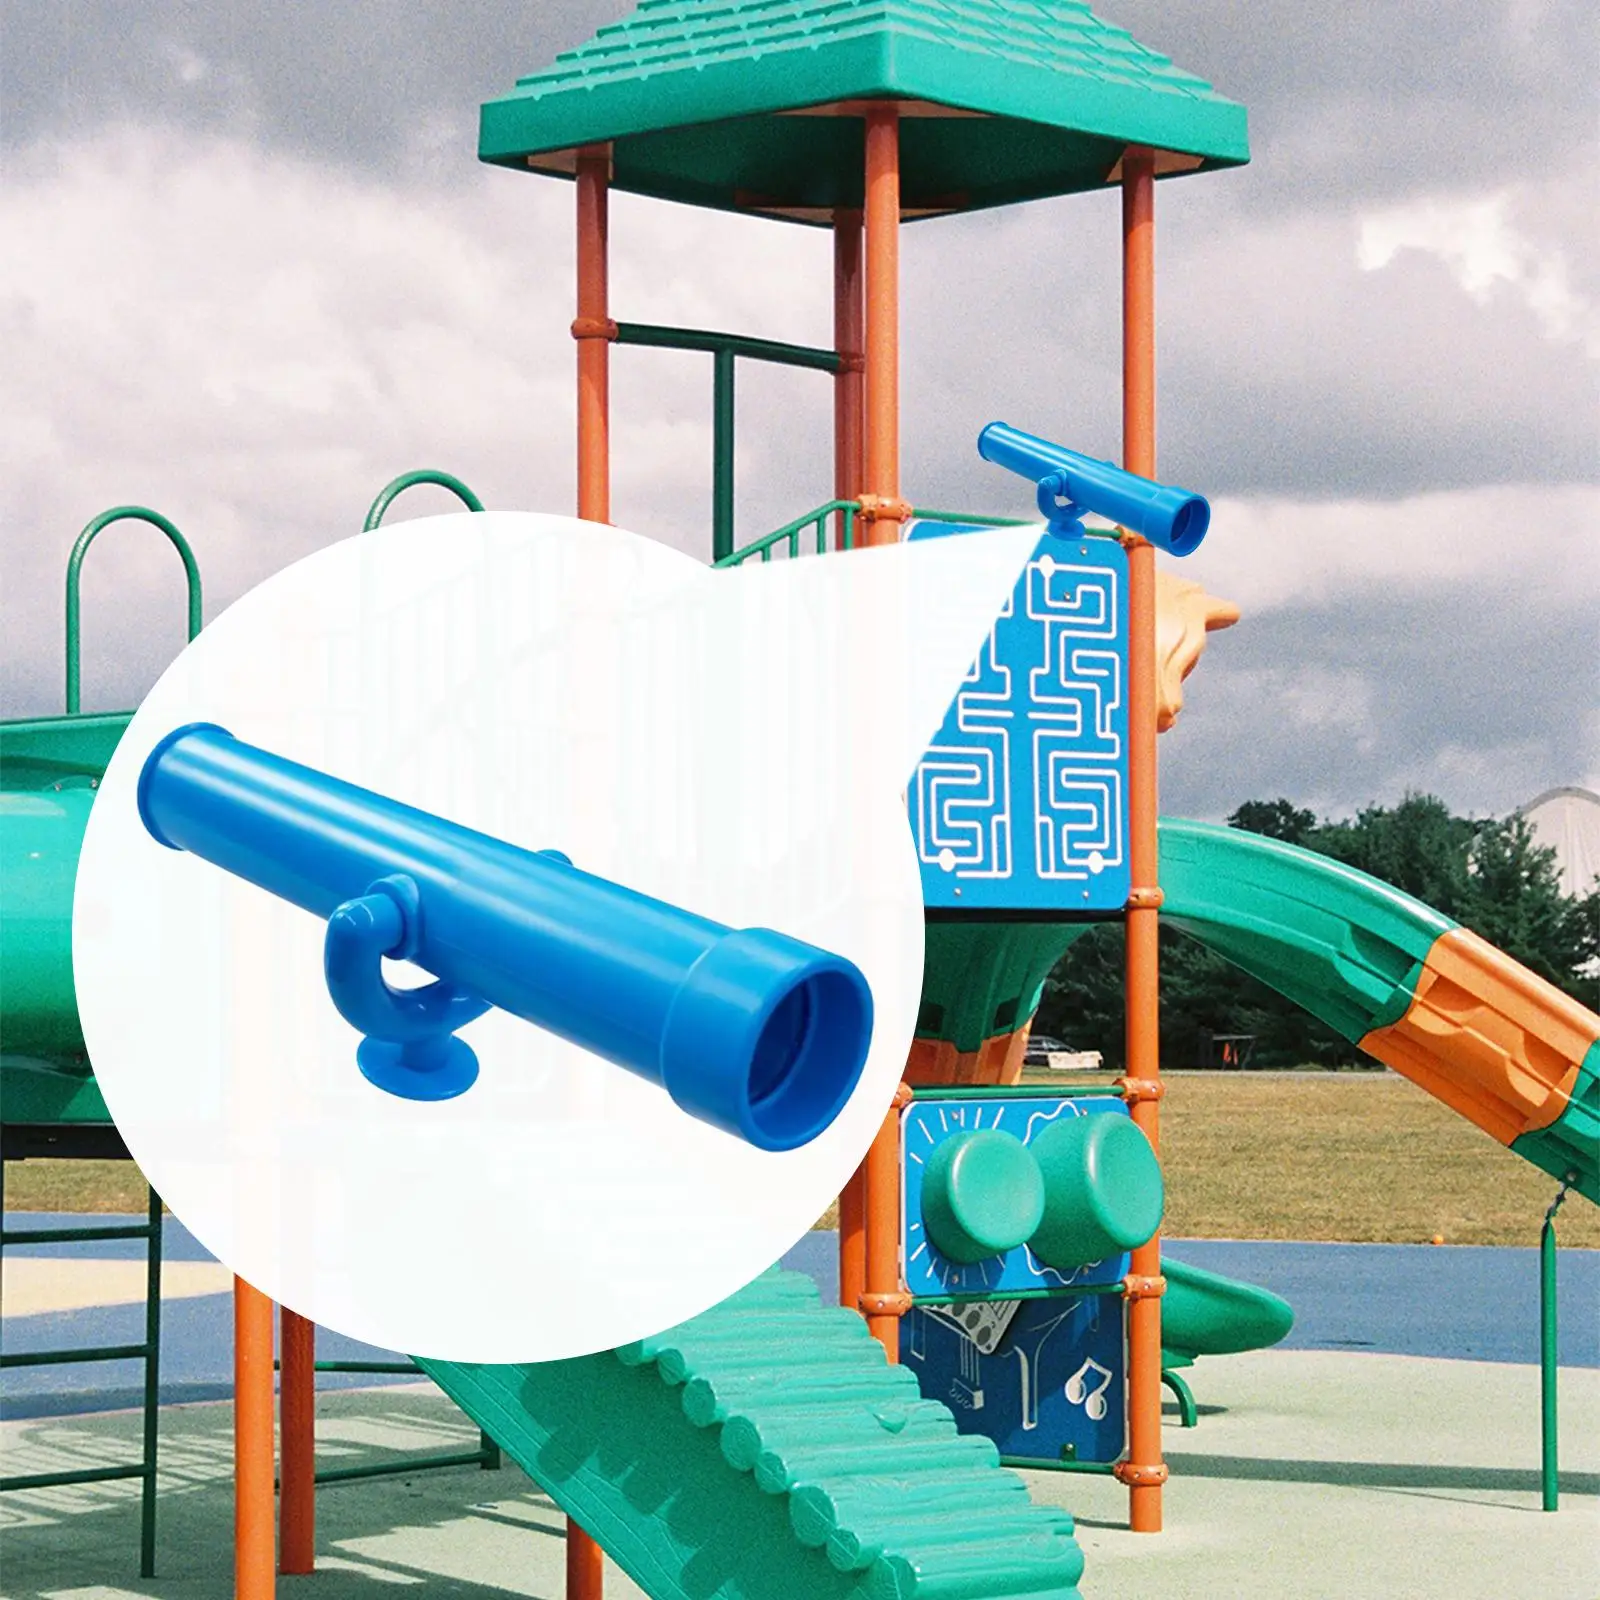 Kids Playground Telescope Playground Accessories for Kids Children Exploring for Outdoor Playhouse Gym Treehouse Accessories